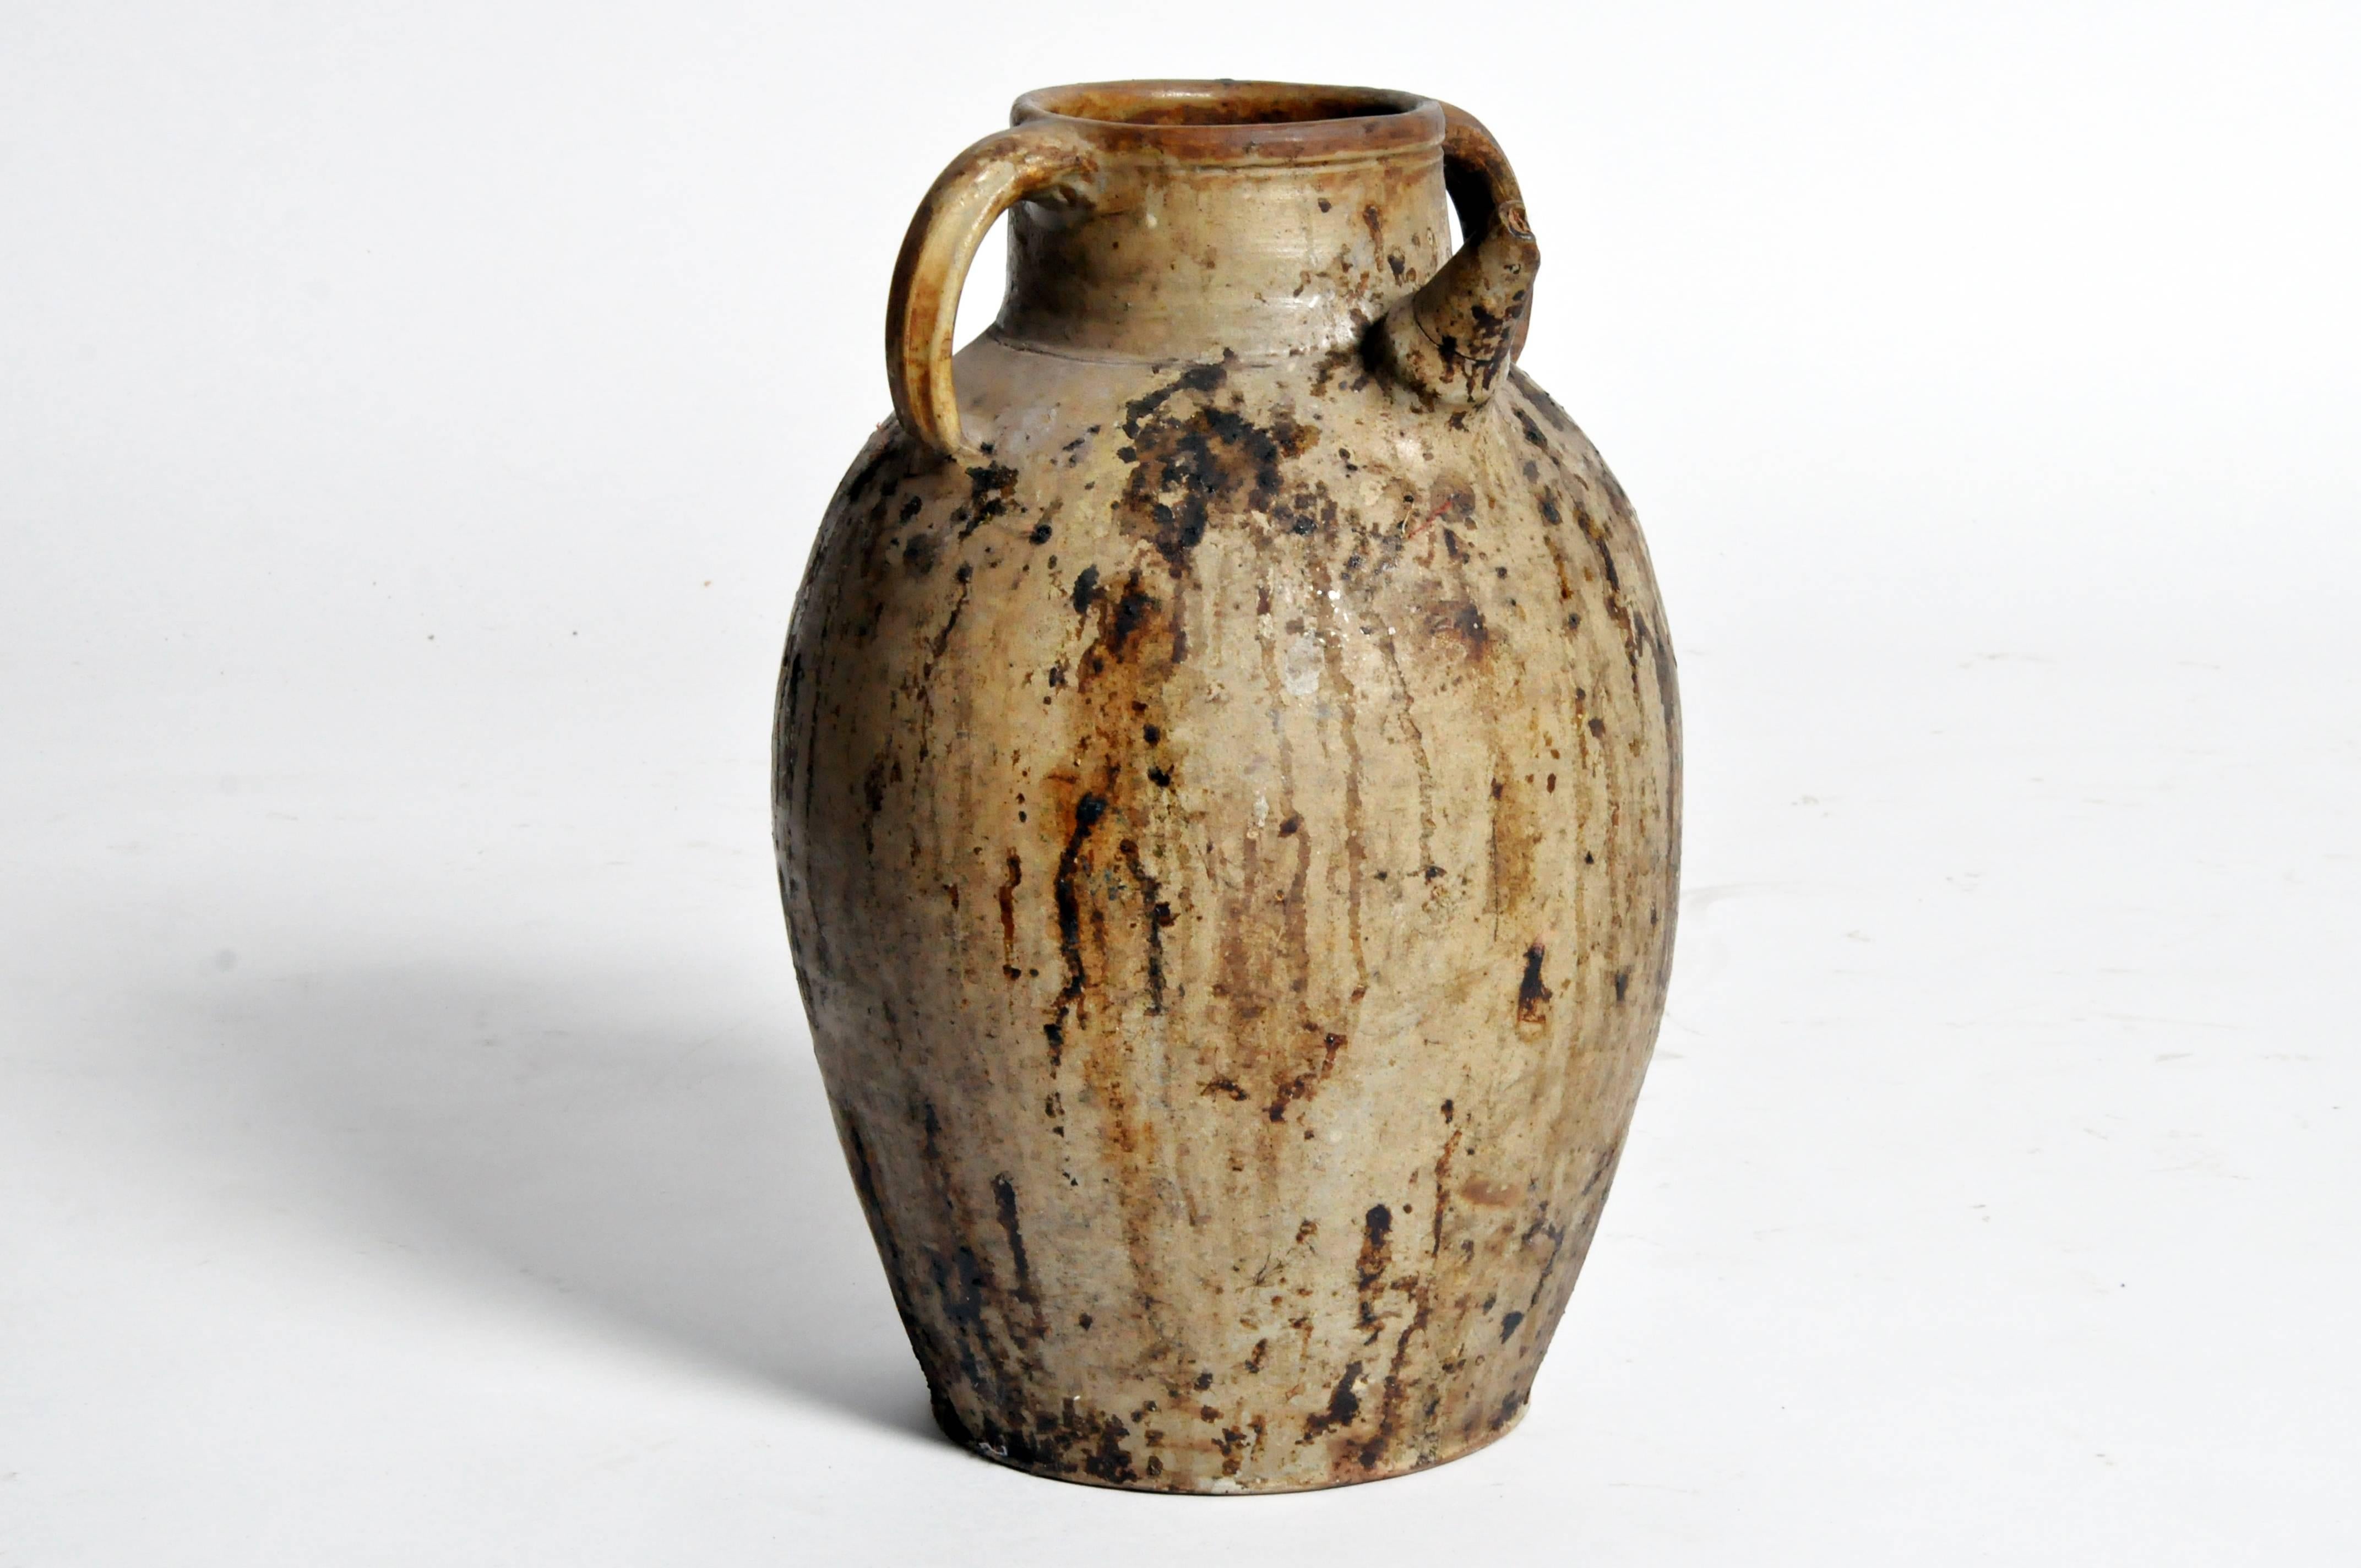 This wine jug is from France and is made from terracotta with ceramic glaze, 19th century.